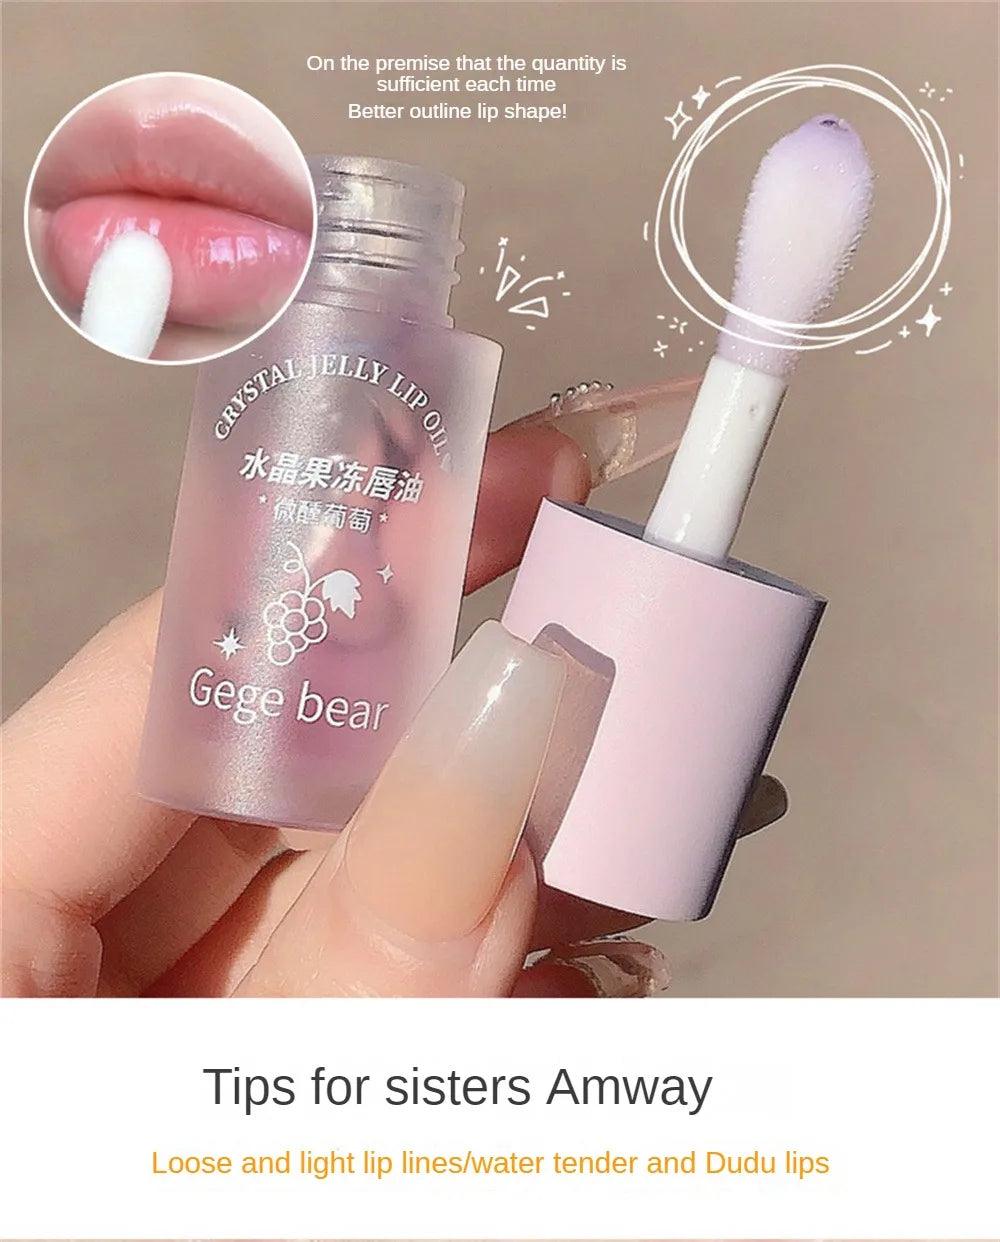 Crystal Jelly Lip Oil: Hydrating Plumping Lip Coat for Glossy Lips.